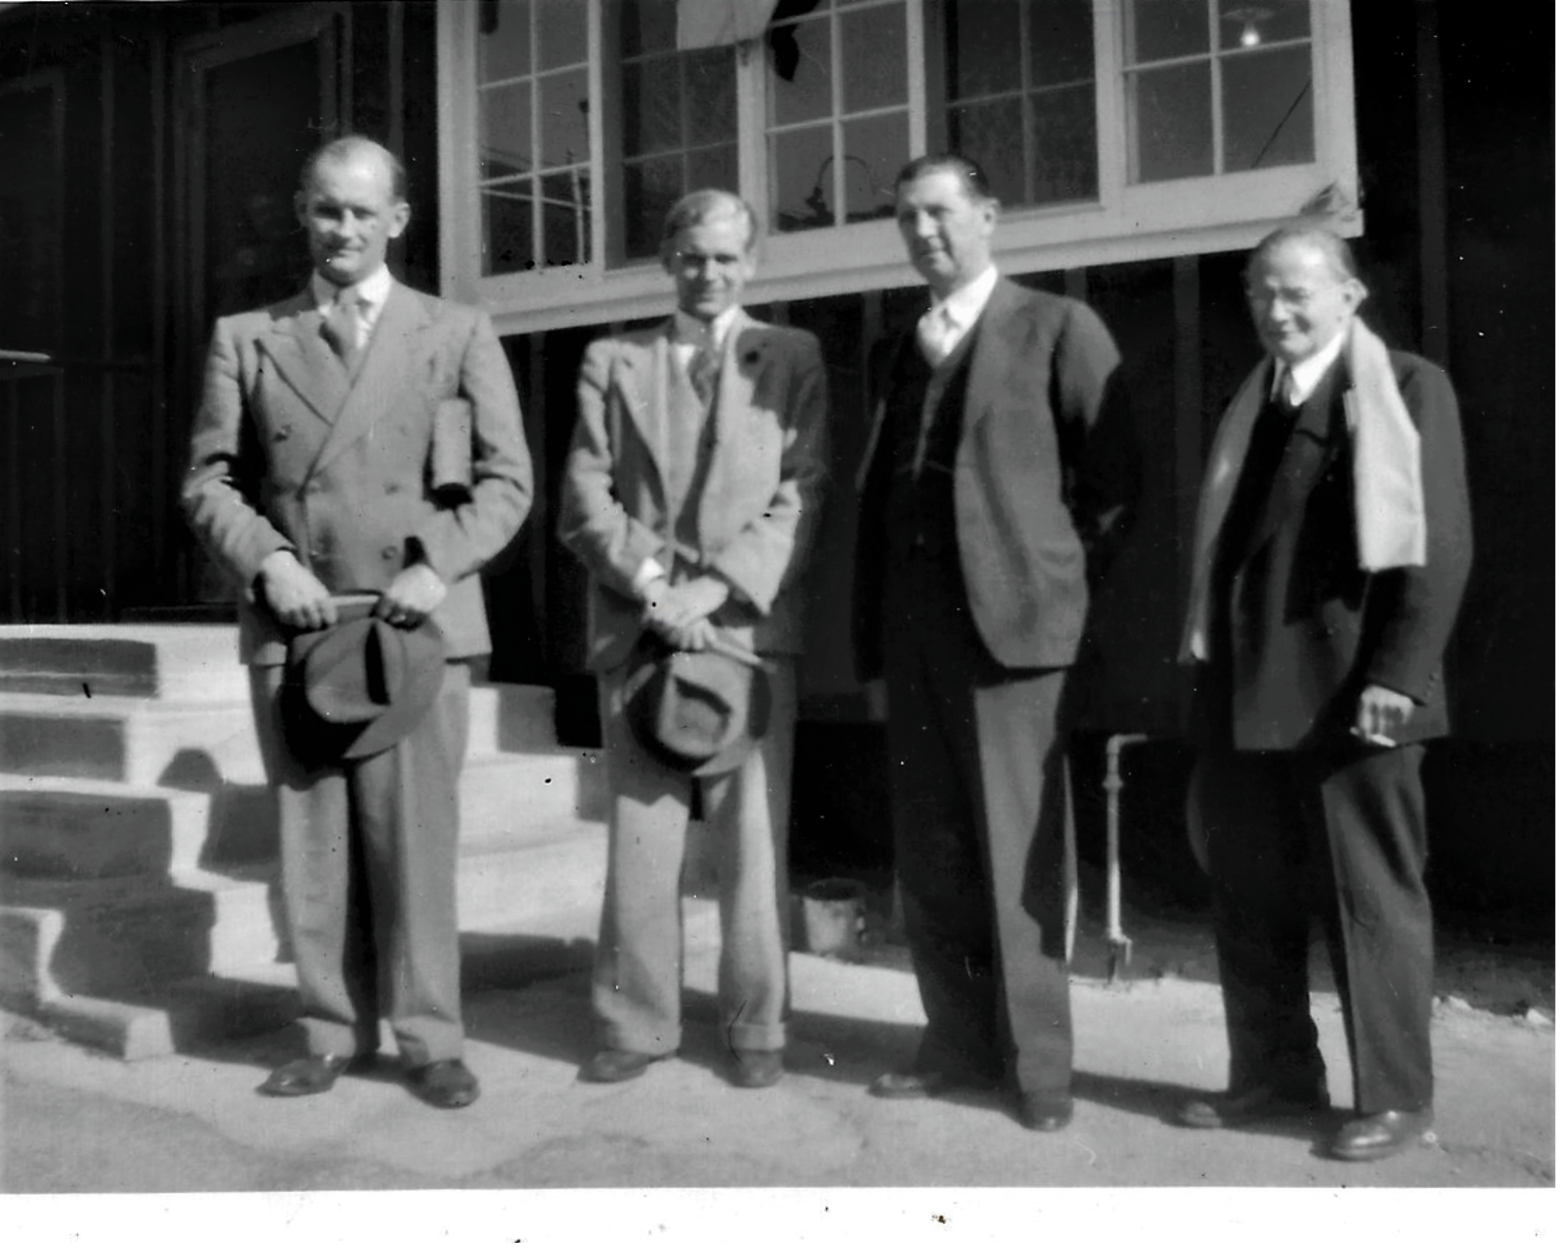 Photo taken on release from Tuna Canyon, 18 January 1943 with from left to right Arnold Bergstraesser, Fritz Caspari, Merrill Scott and Karl Vollmoeller